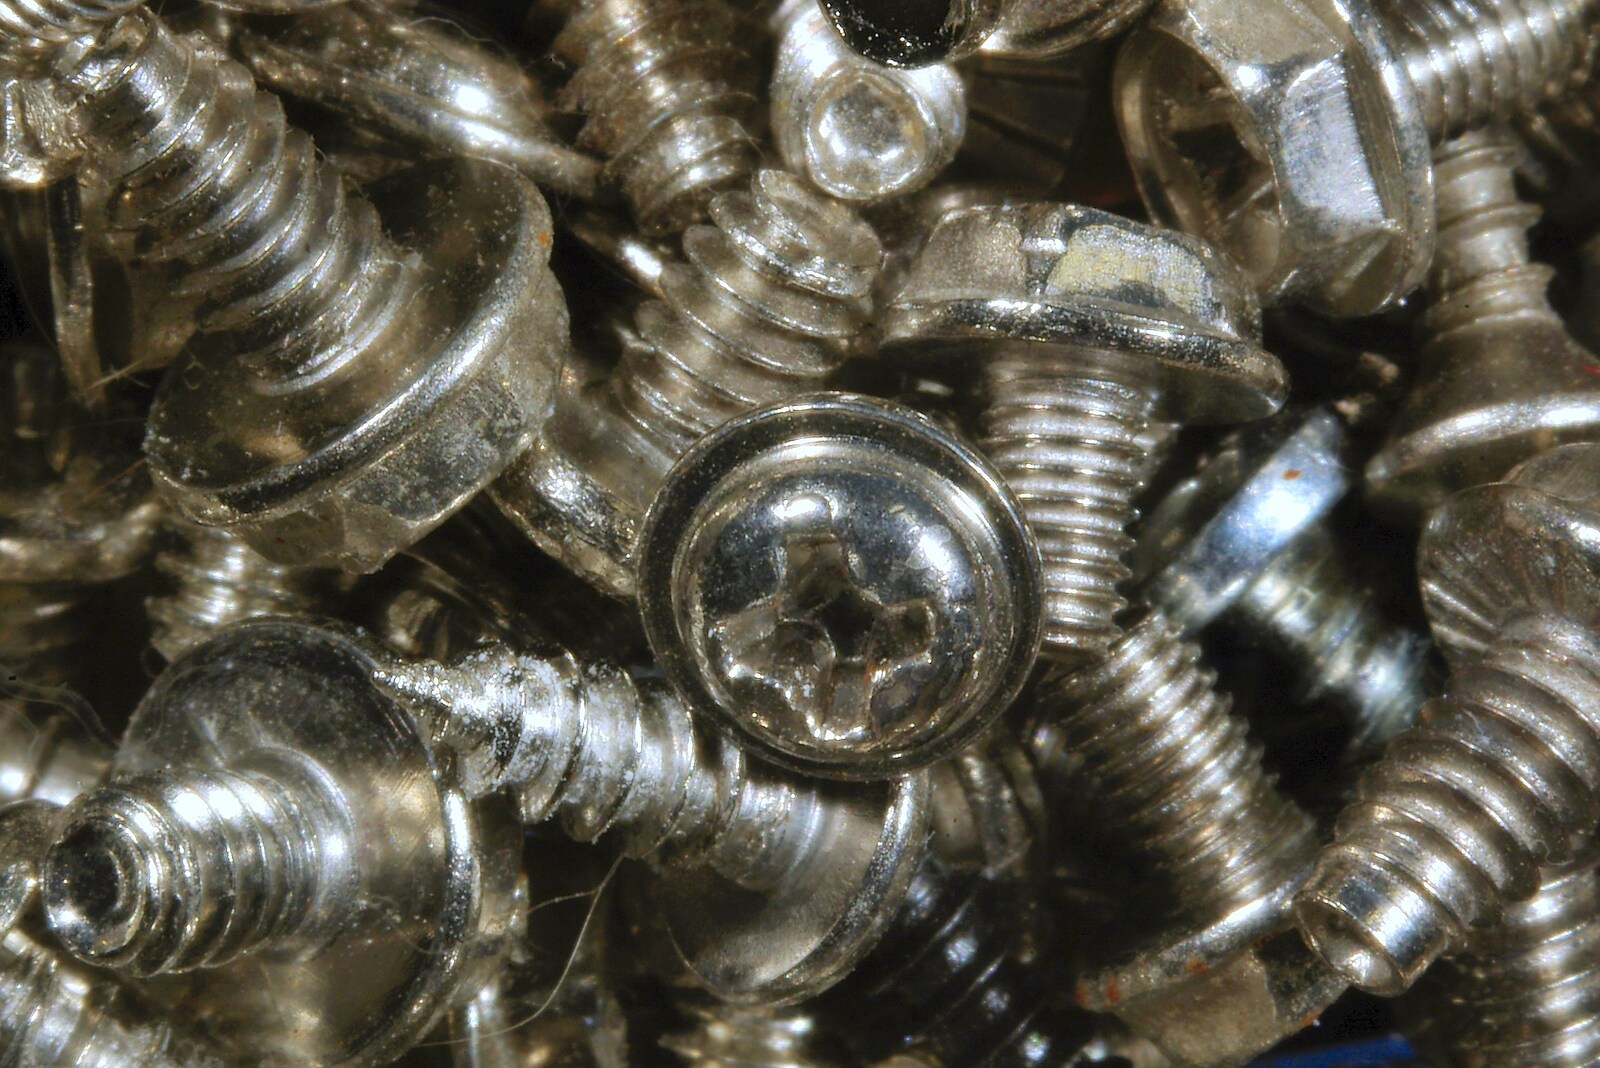 Lots of small PC screws from Fun With Bellows: Macro Photography, Brome, Suffolk - 13th May 2006